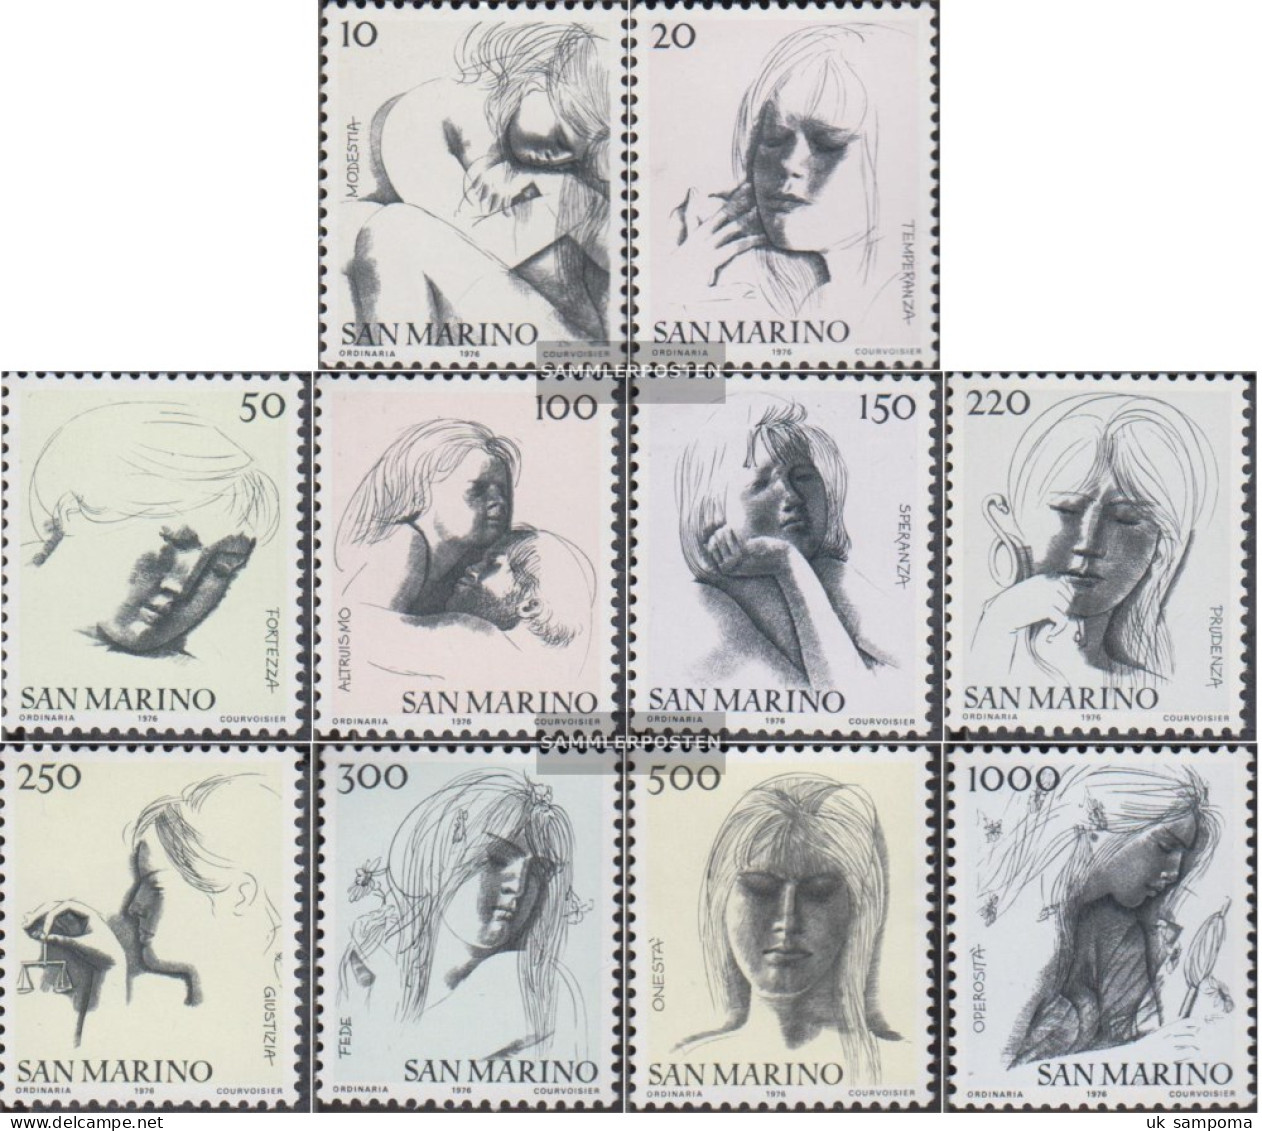 San Marino 1105-1114 (complete Issue) Unmounted Mint / Never Hinged 1976 The Virtues - Nuovi